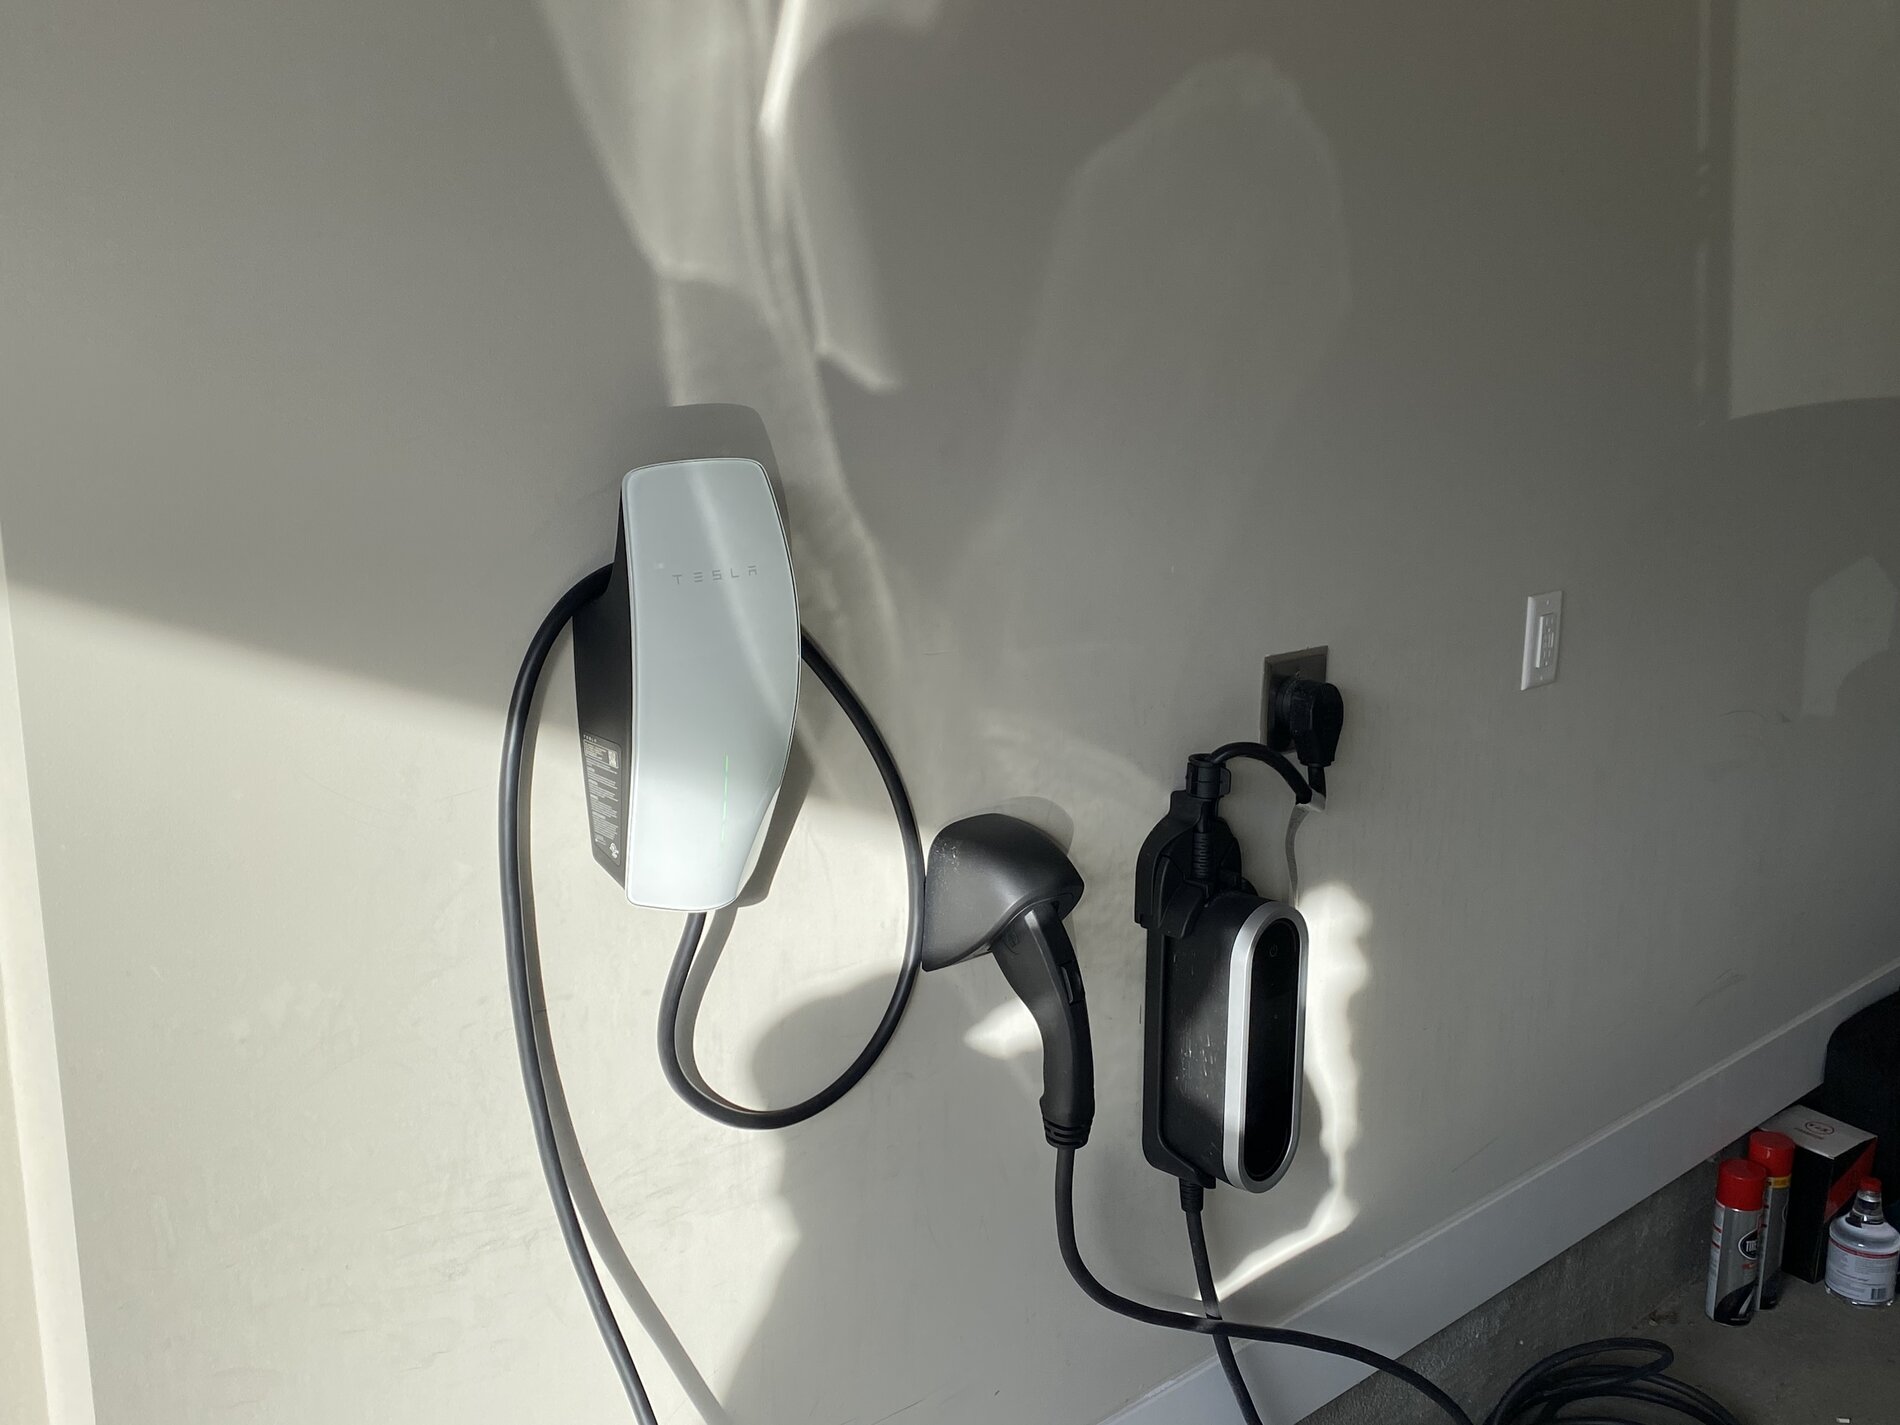 First use of Tesla Gen 3 wall charger and Tesla Tap adapter to charge at  48amps